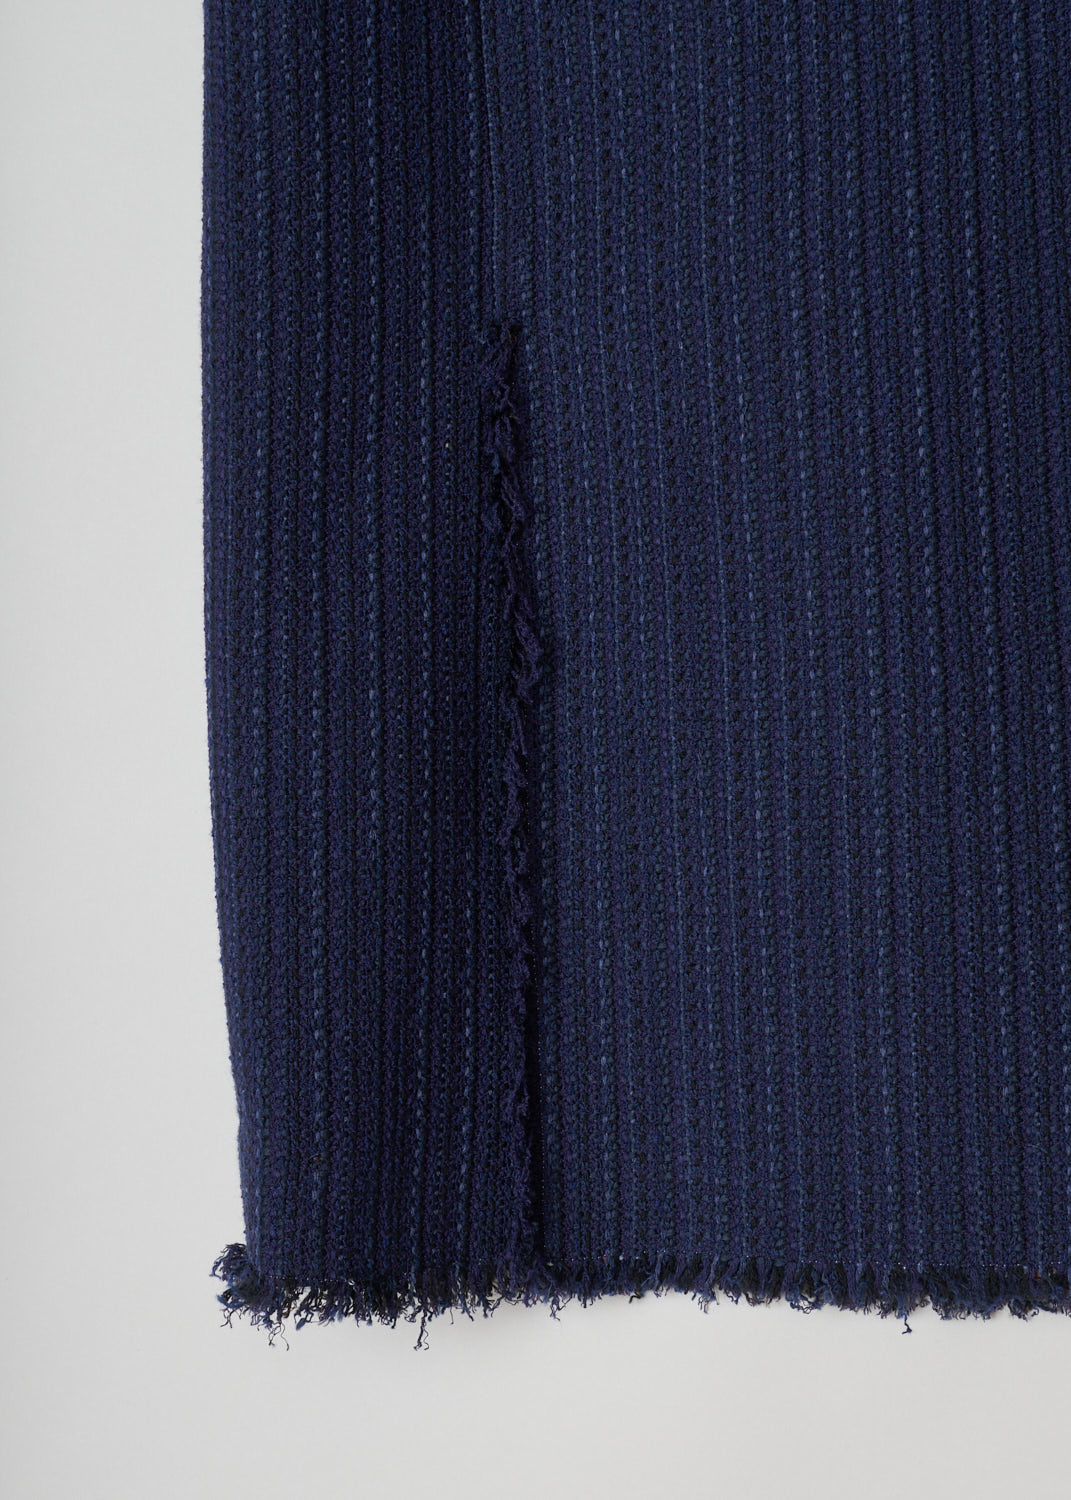 Thom Browne, Blue knitted pencil skirt, FGC452T_04529_415_navy, blue, detail. Starting from the top this lovely pencil skirt has raw frilled edges. Zipper on the side for fastening. Also the hem is similarly unfinished and has frills hanging off. On the back this model has two splits.